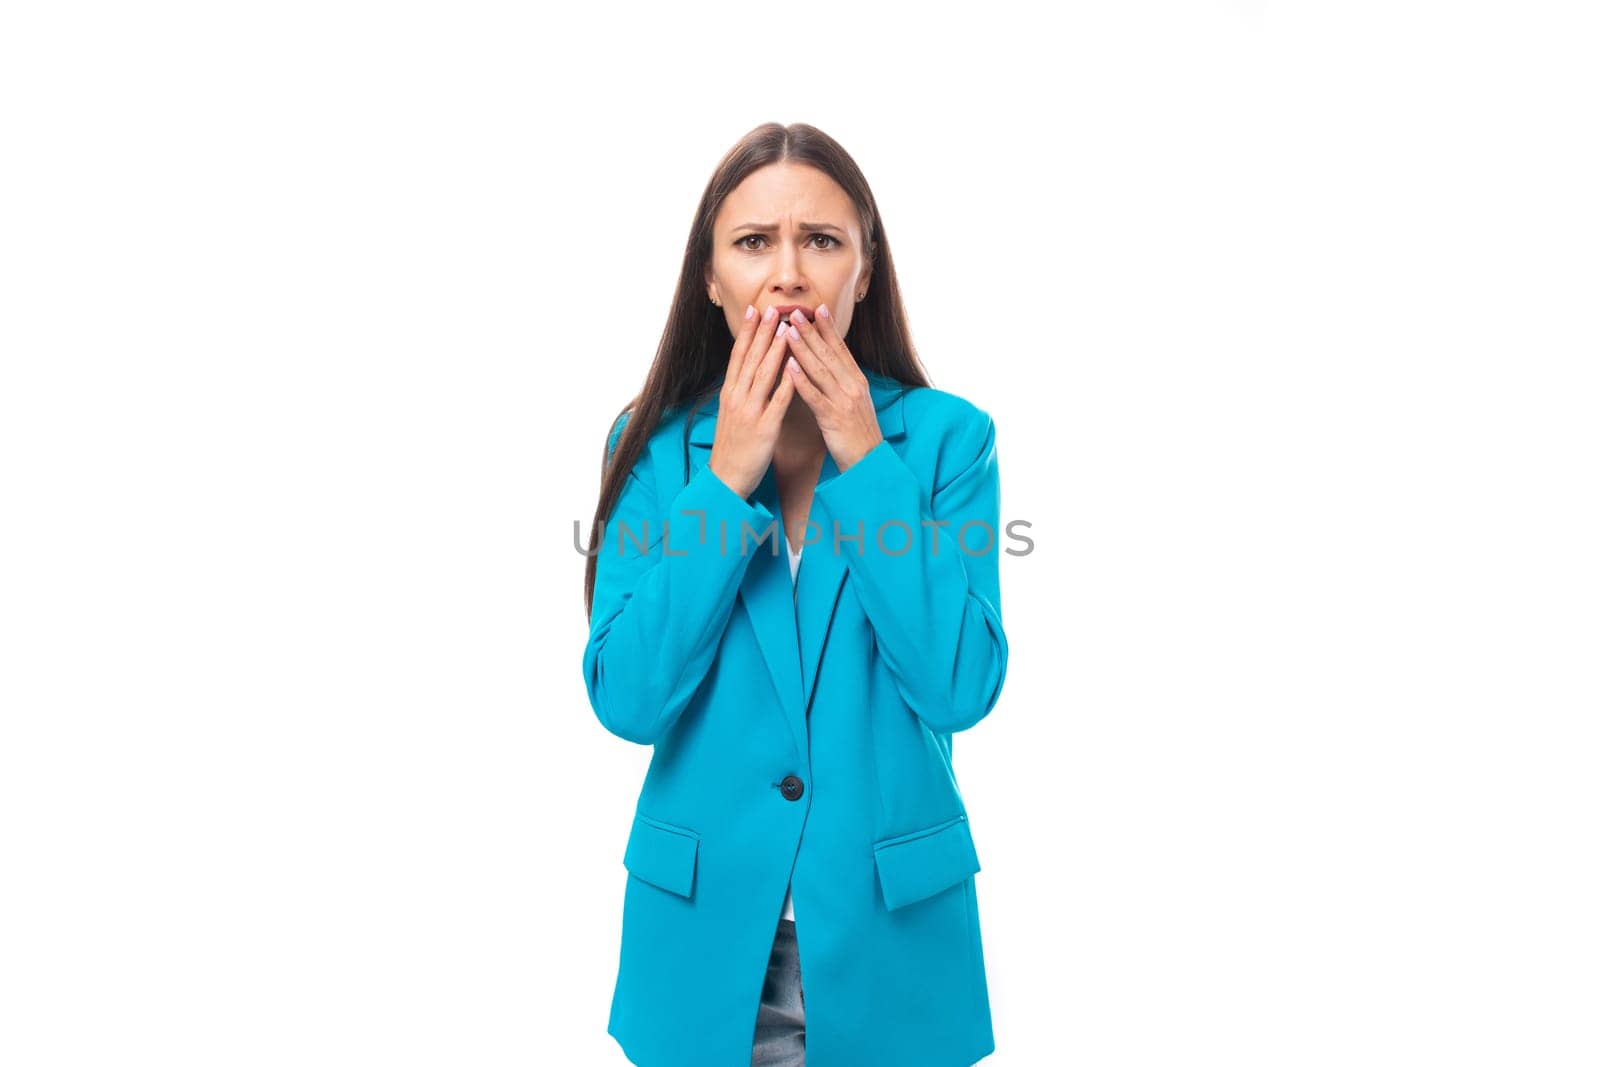 young attractive office worker woman with black straight hair in a blue business jacket is surprised on a white background with copy space.